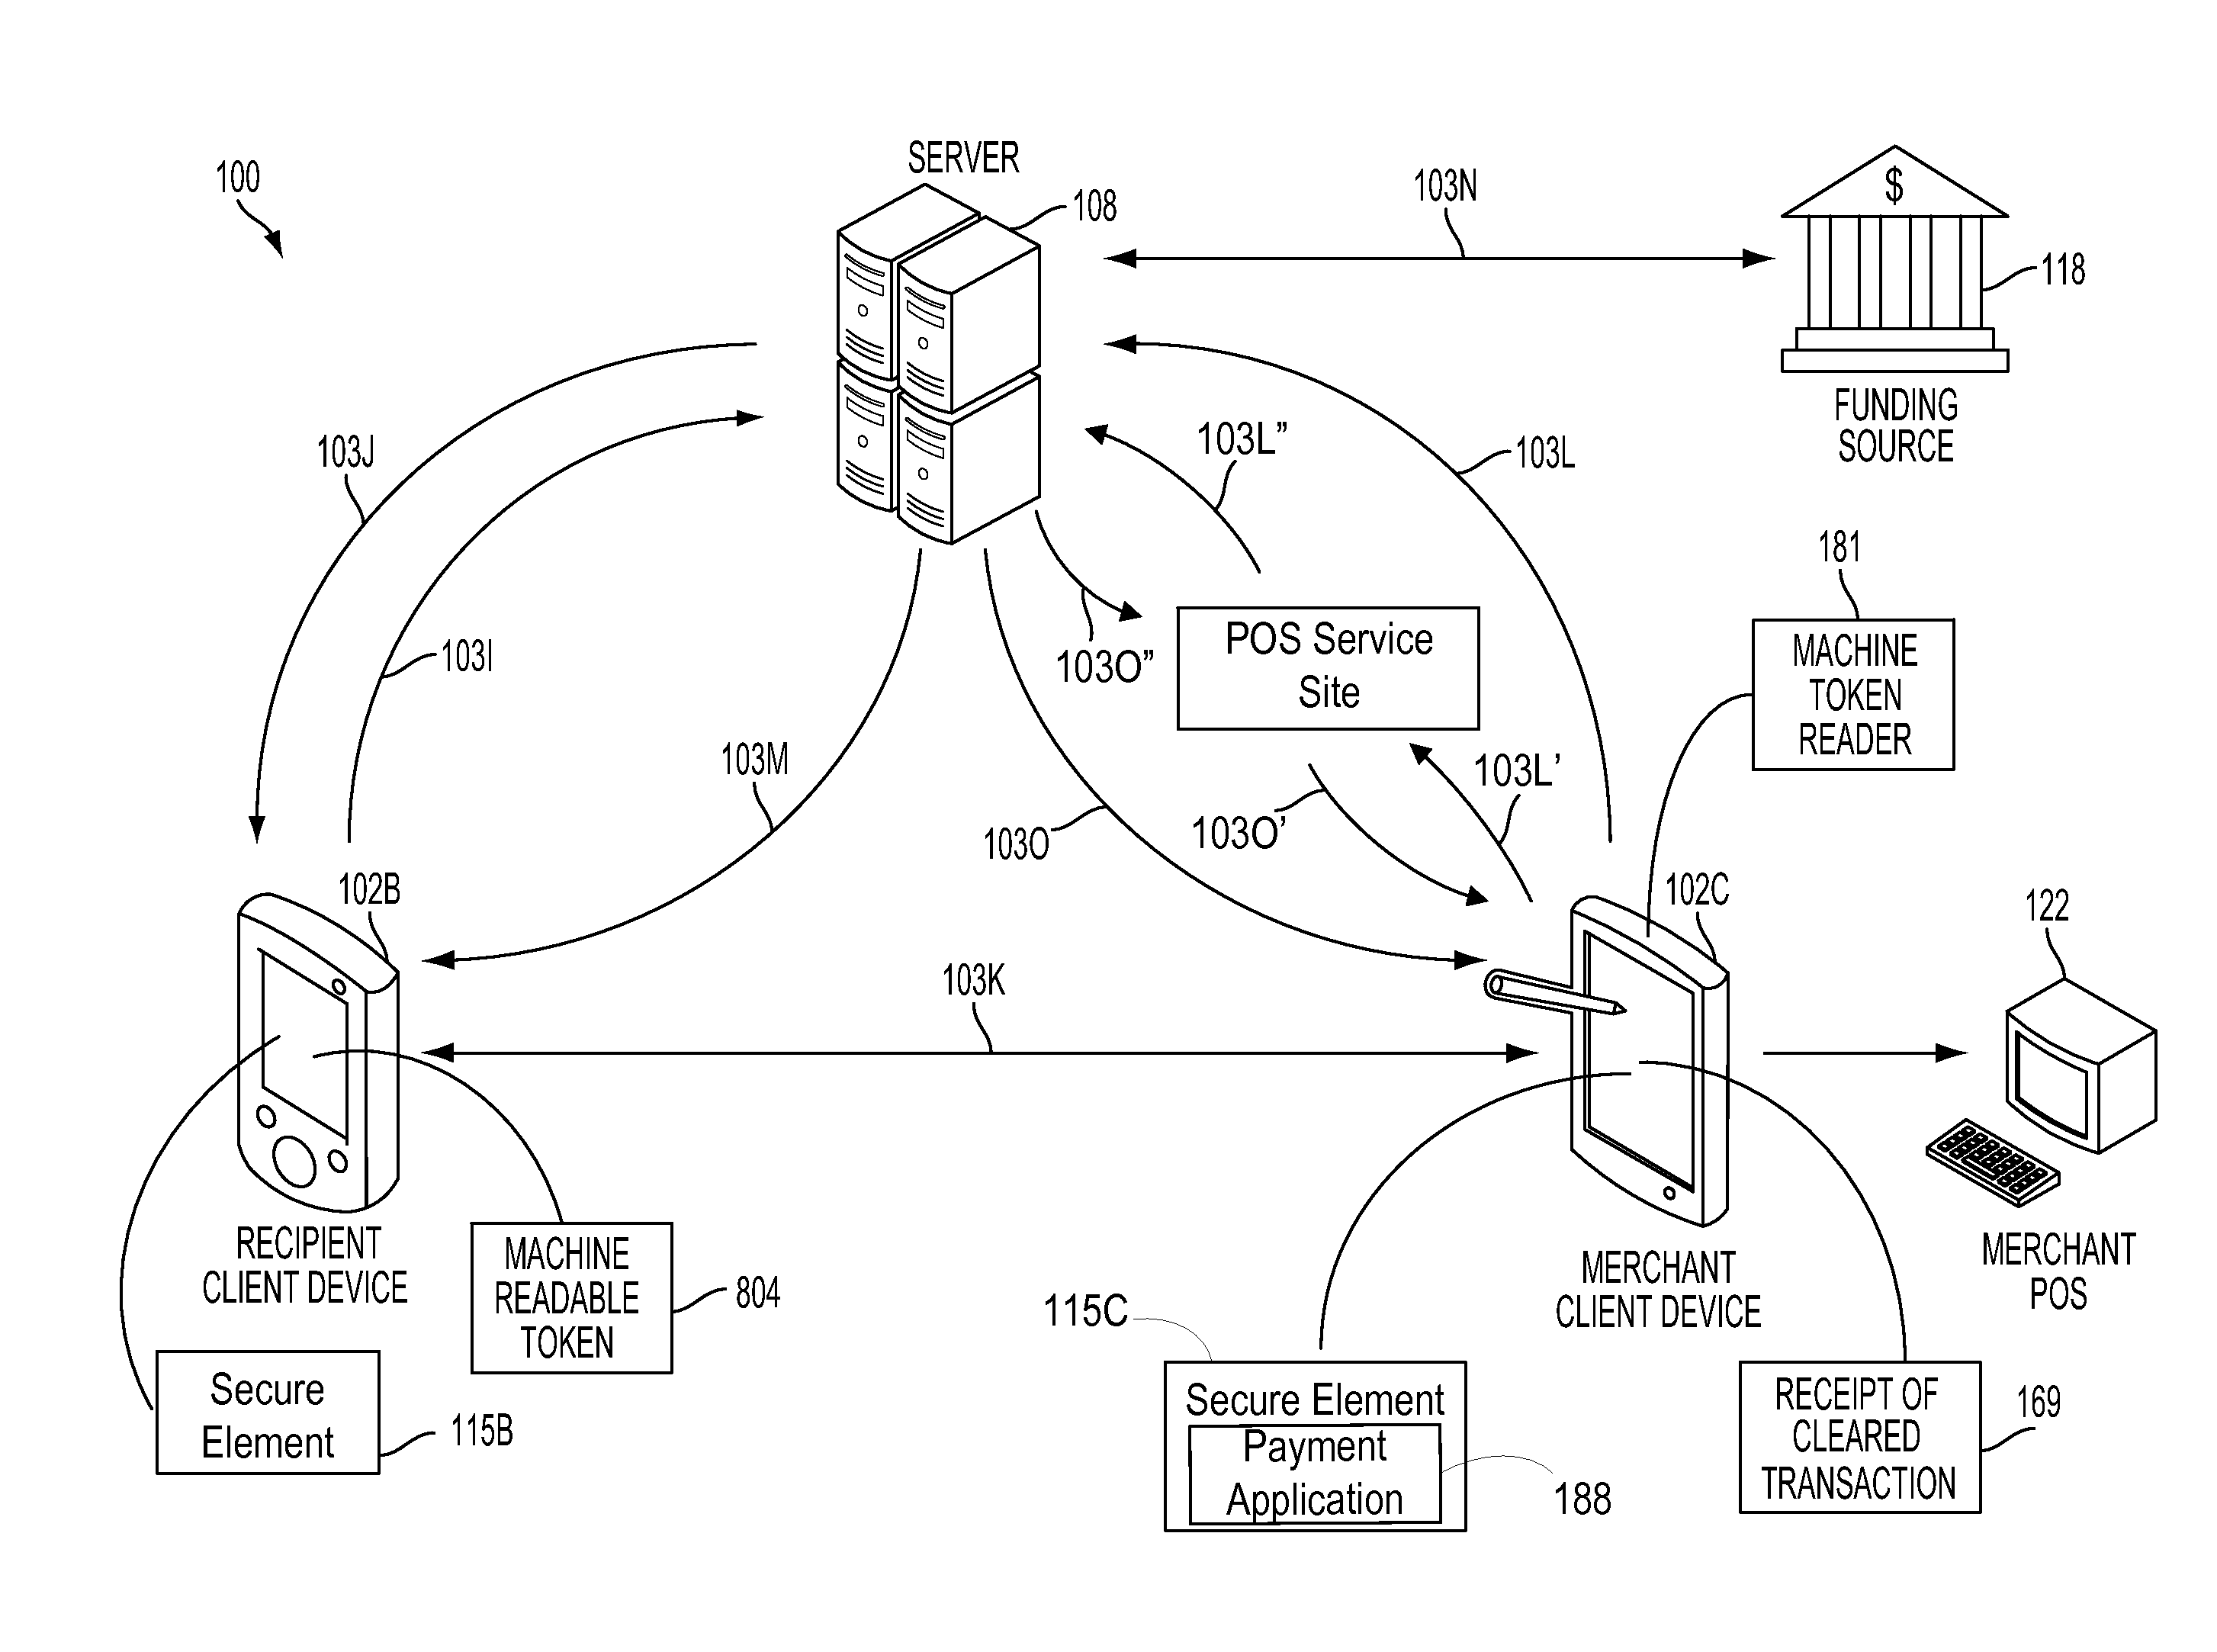 System and method for point of service payment acceptance via wireless communication